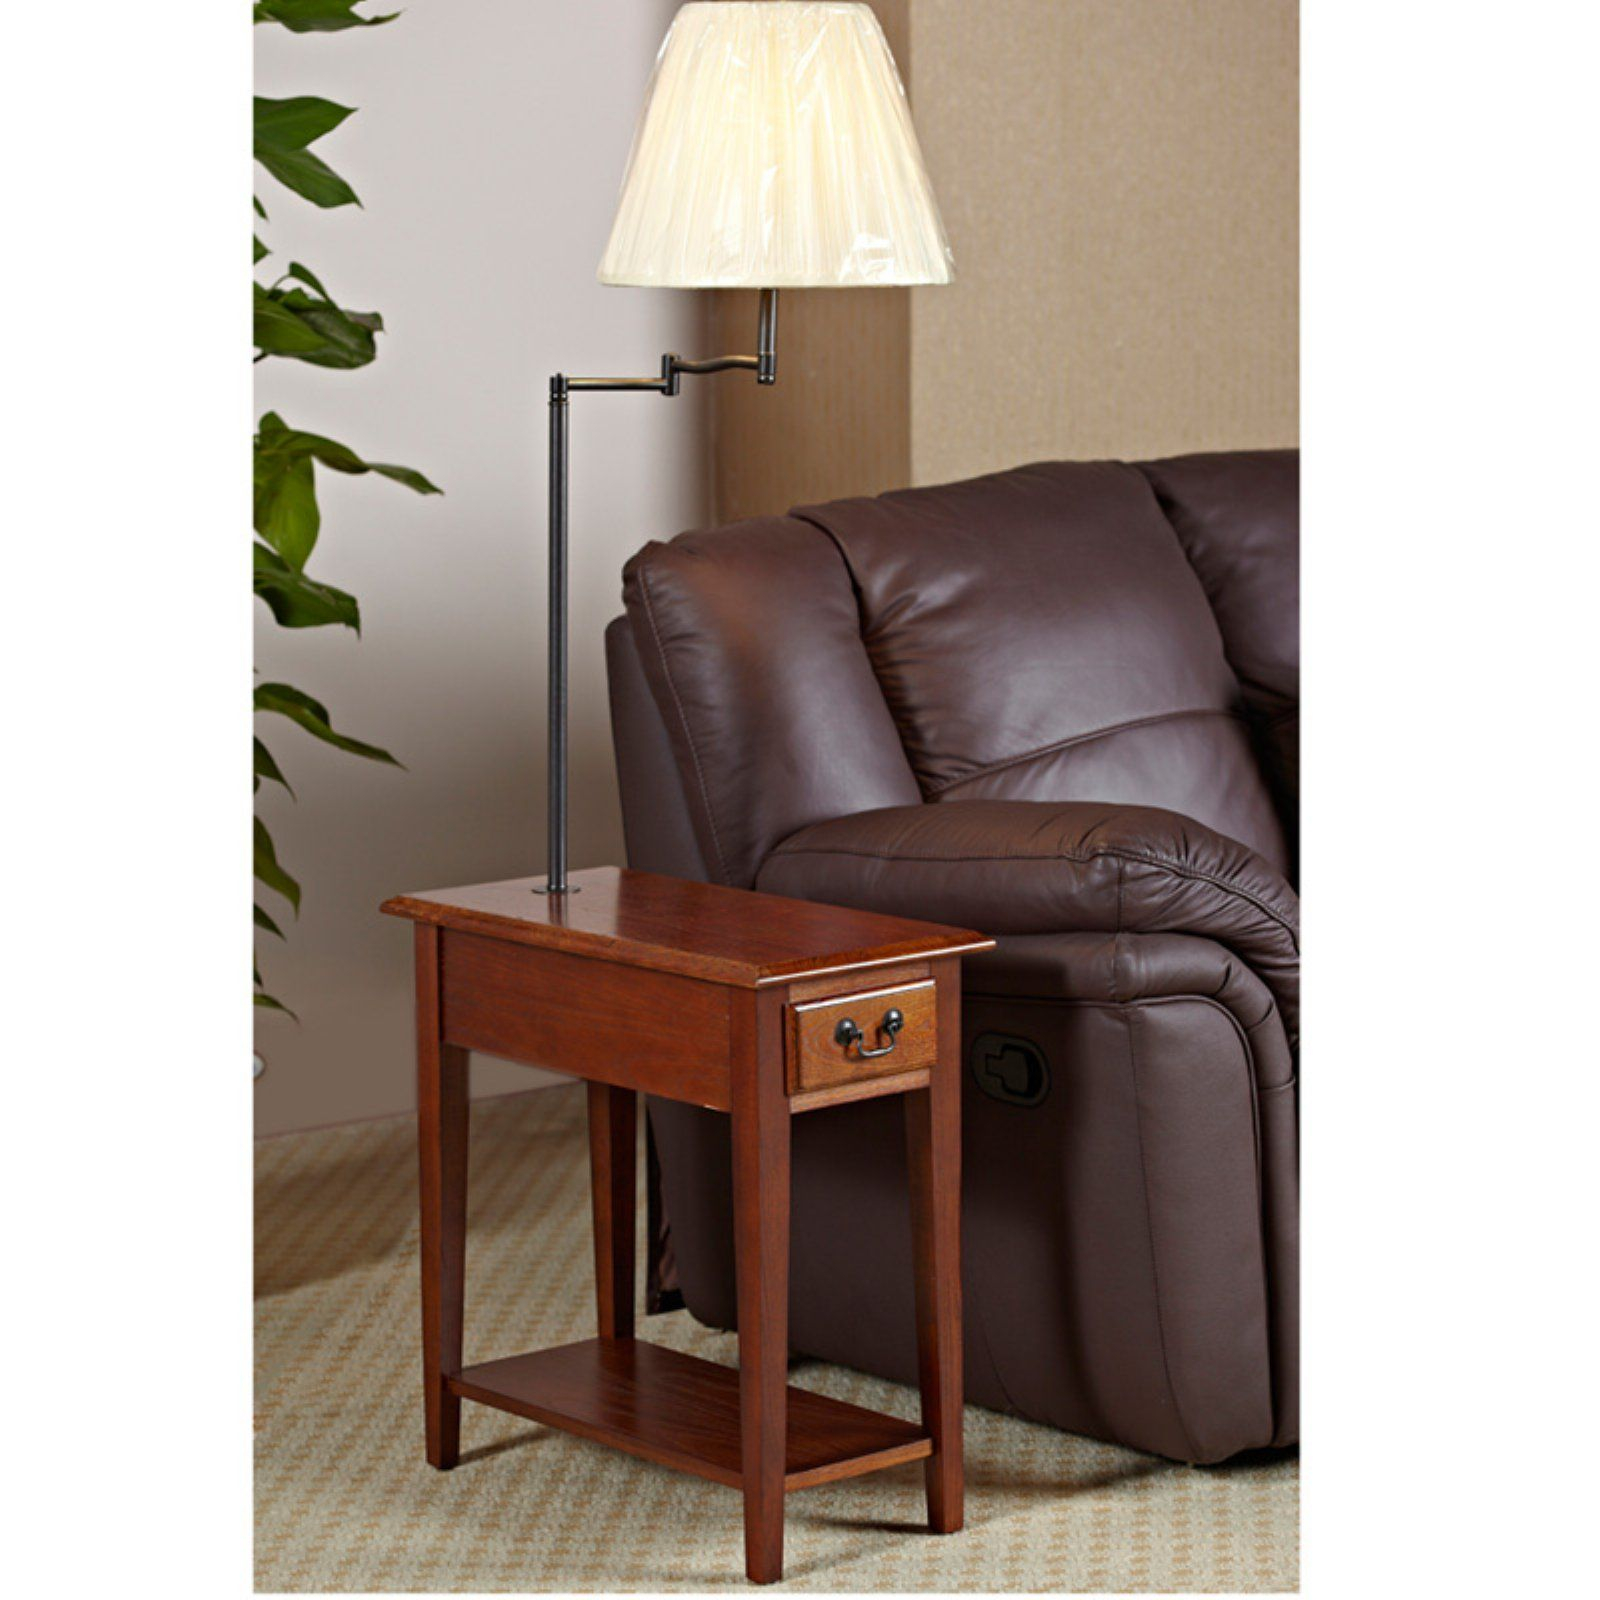 Leick Home Chairside Oak End Table With Swing Arm Lamp In throughout measurements 1600 X 1600